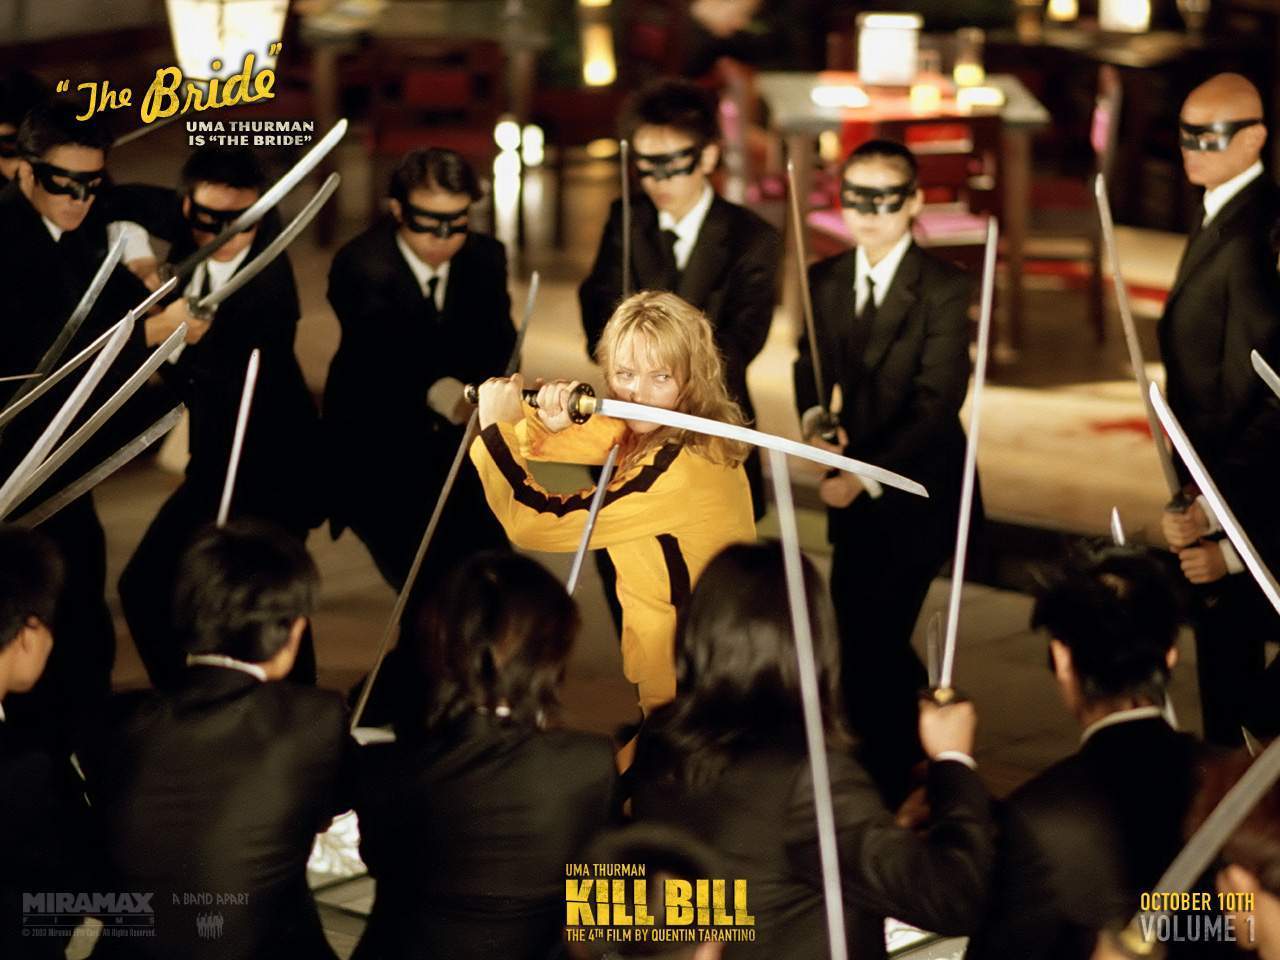 image about Kill Bill. A well, HD movies